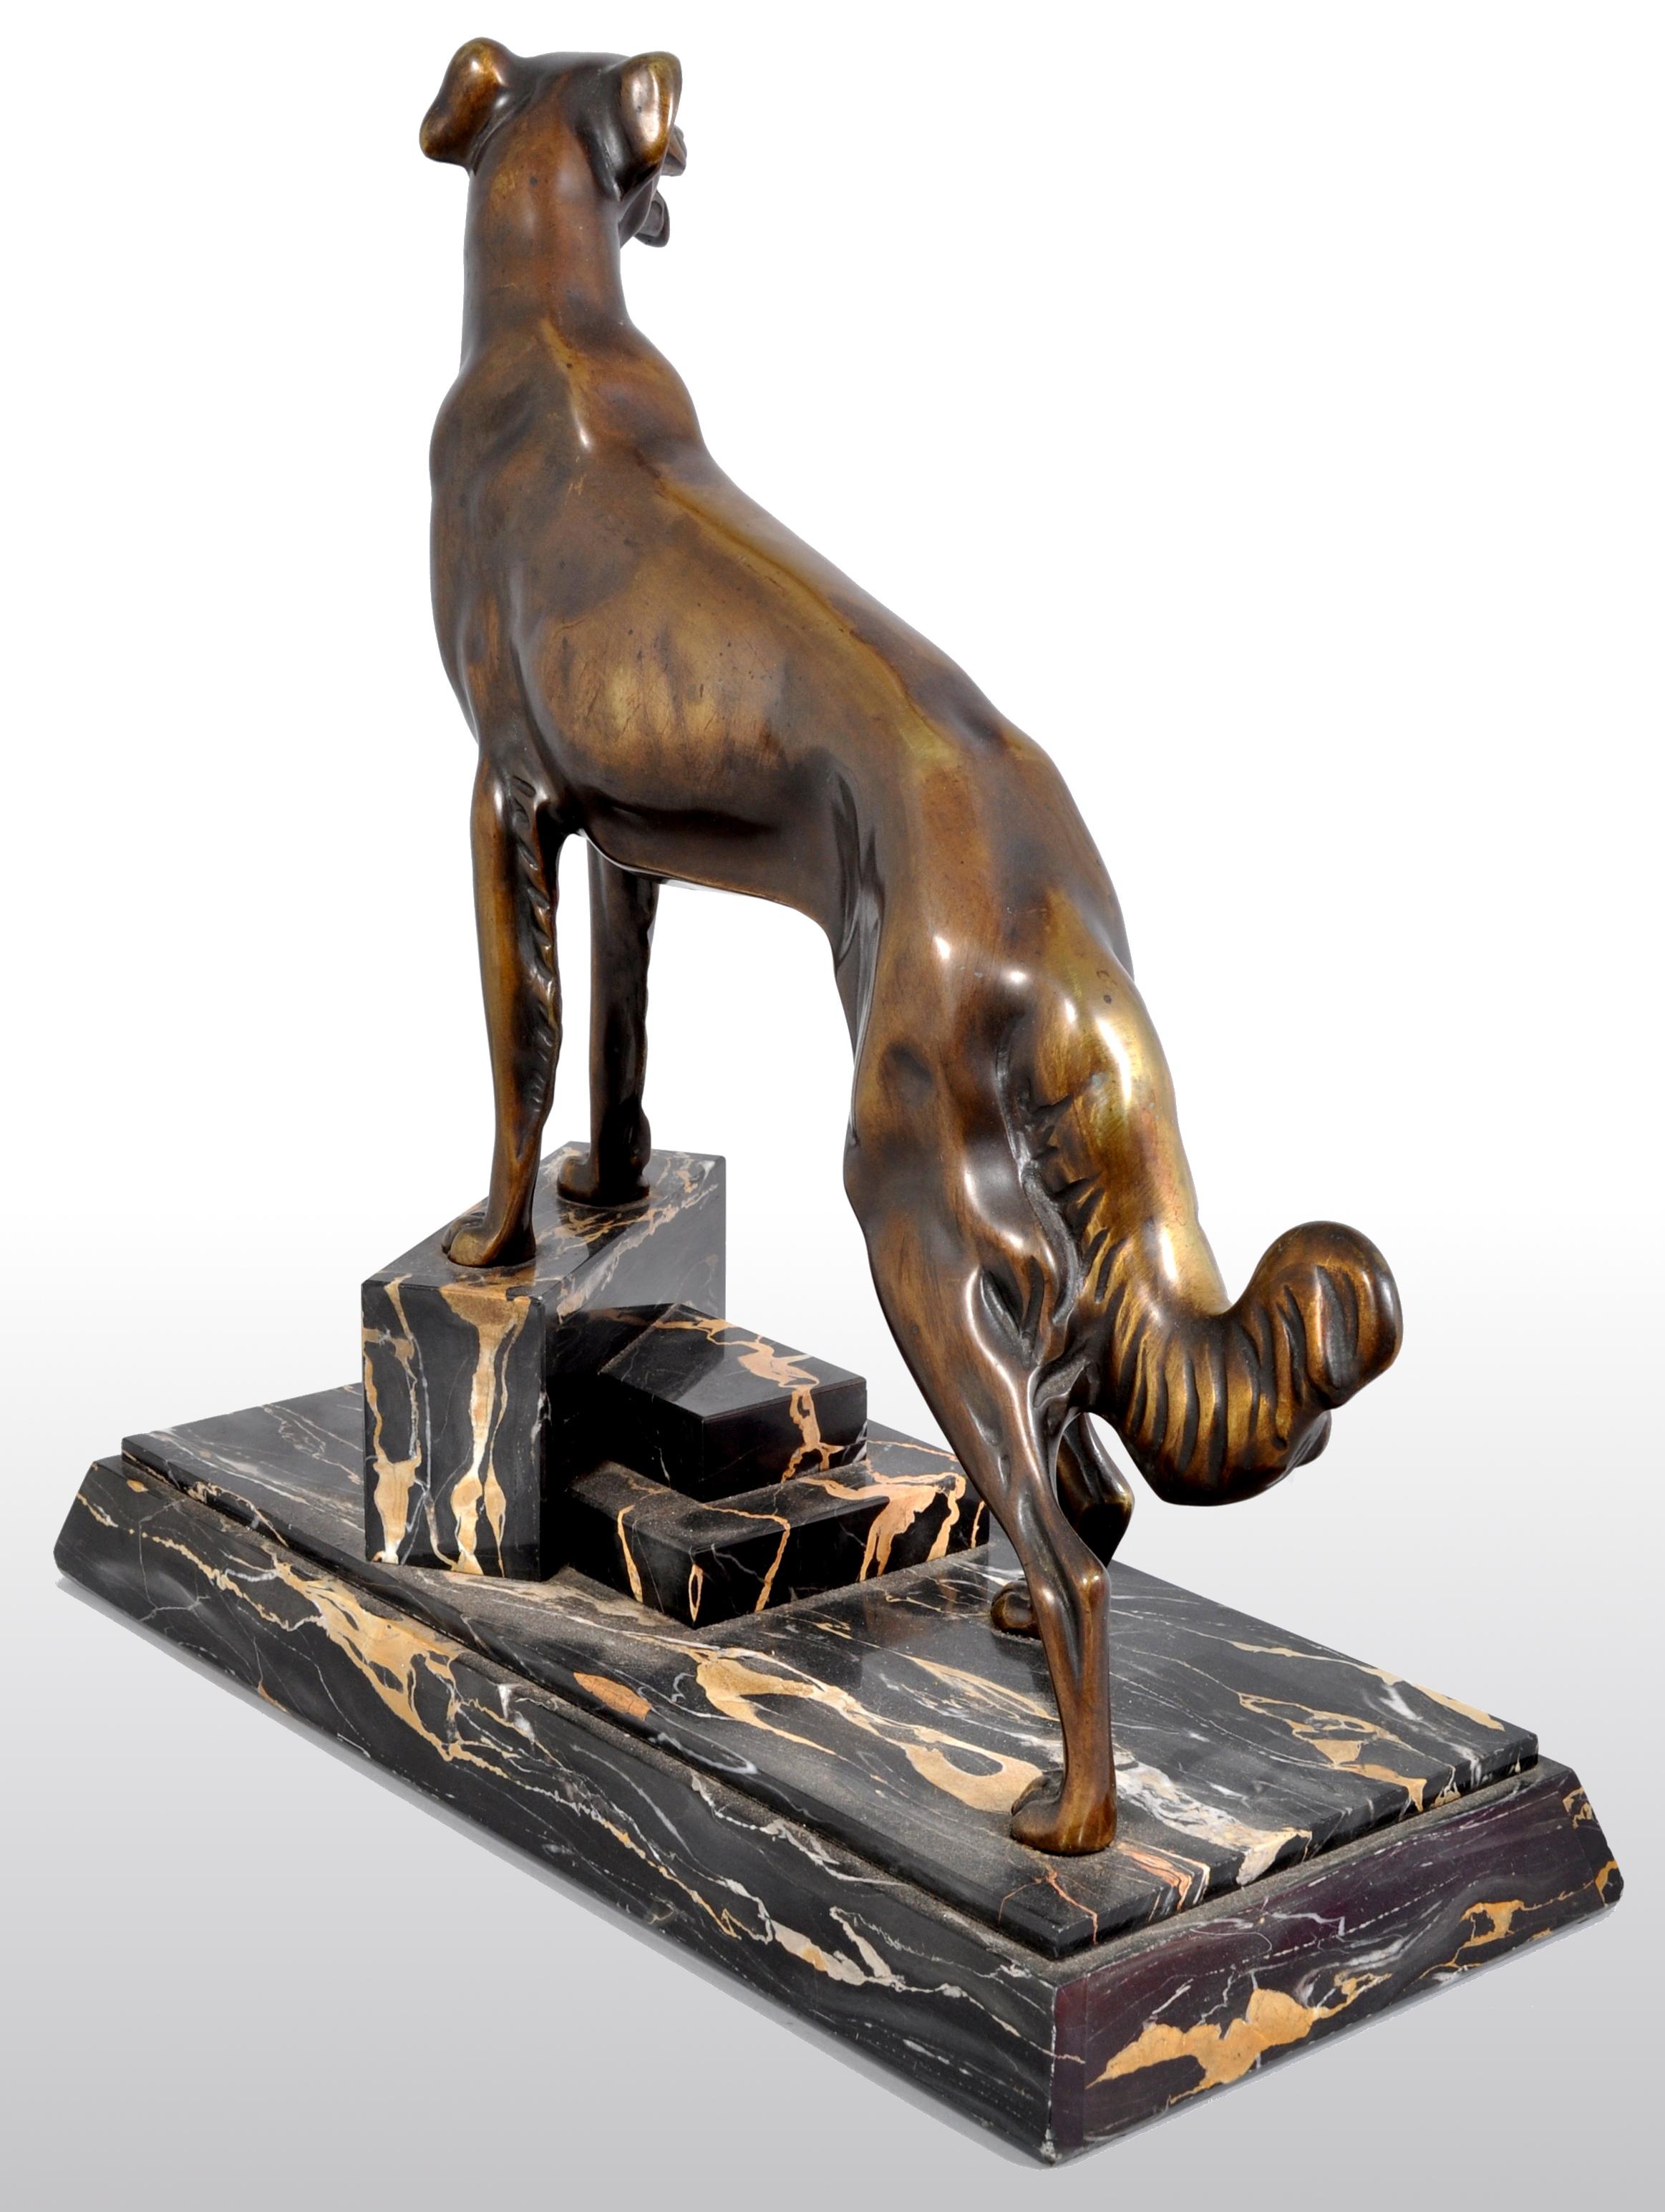 Antique Art Deco Bronze of a Russian Borzoi/Wolfhound/Dog by Louis-Albert Carvin (1875-1951). This very stylish bronze depicts a  handsome Russian Wolfhound (Borzoi), proudly standing on a stepped and veined marble plinth. The bronze signed 